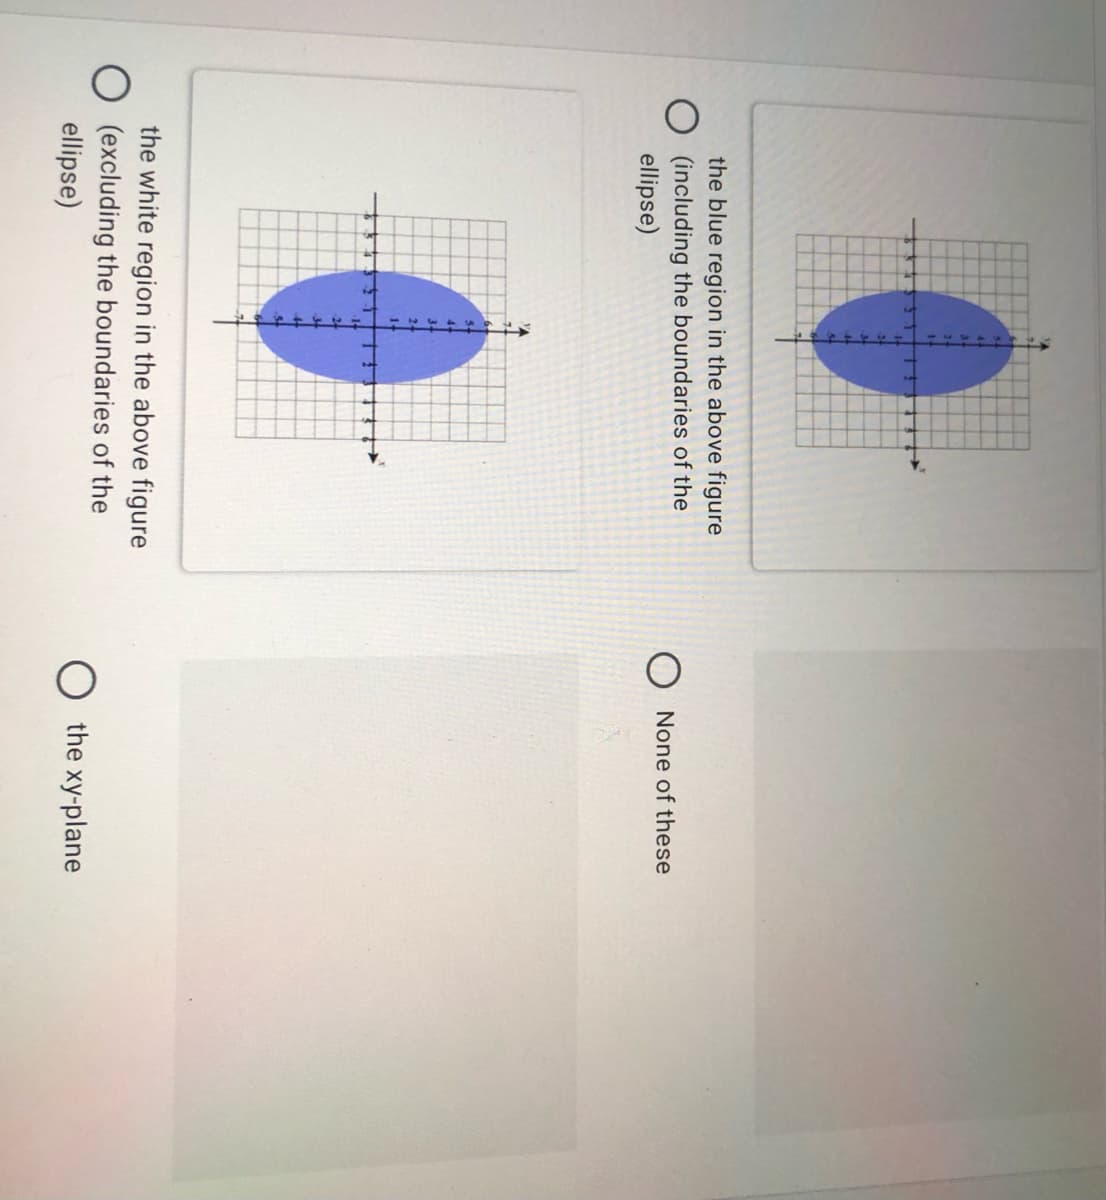 the blue region in the above figure
O (including the boundaries of the
ellipse)
None of these
the white region in the above figure
(excluding the boundaries of the
ellipse)
O the xy-plane
